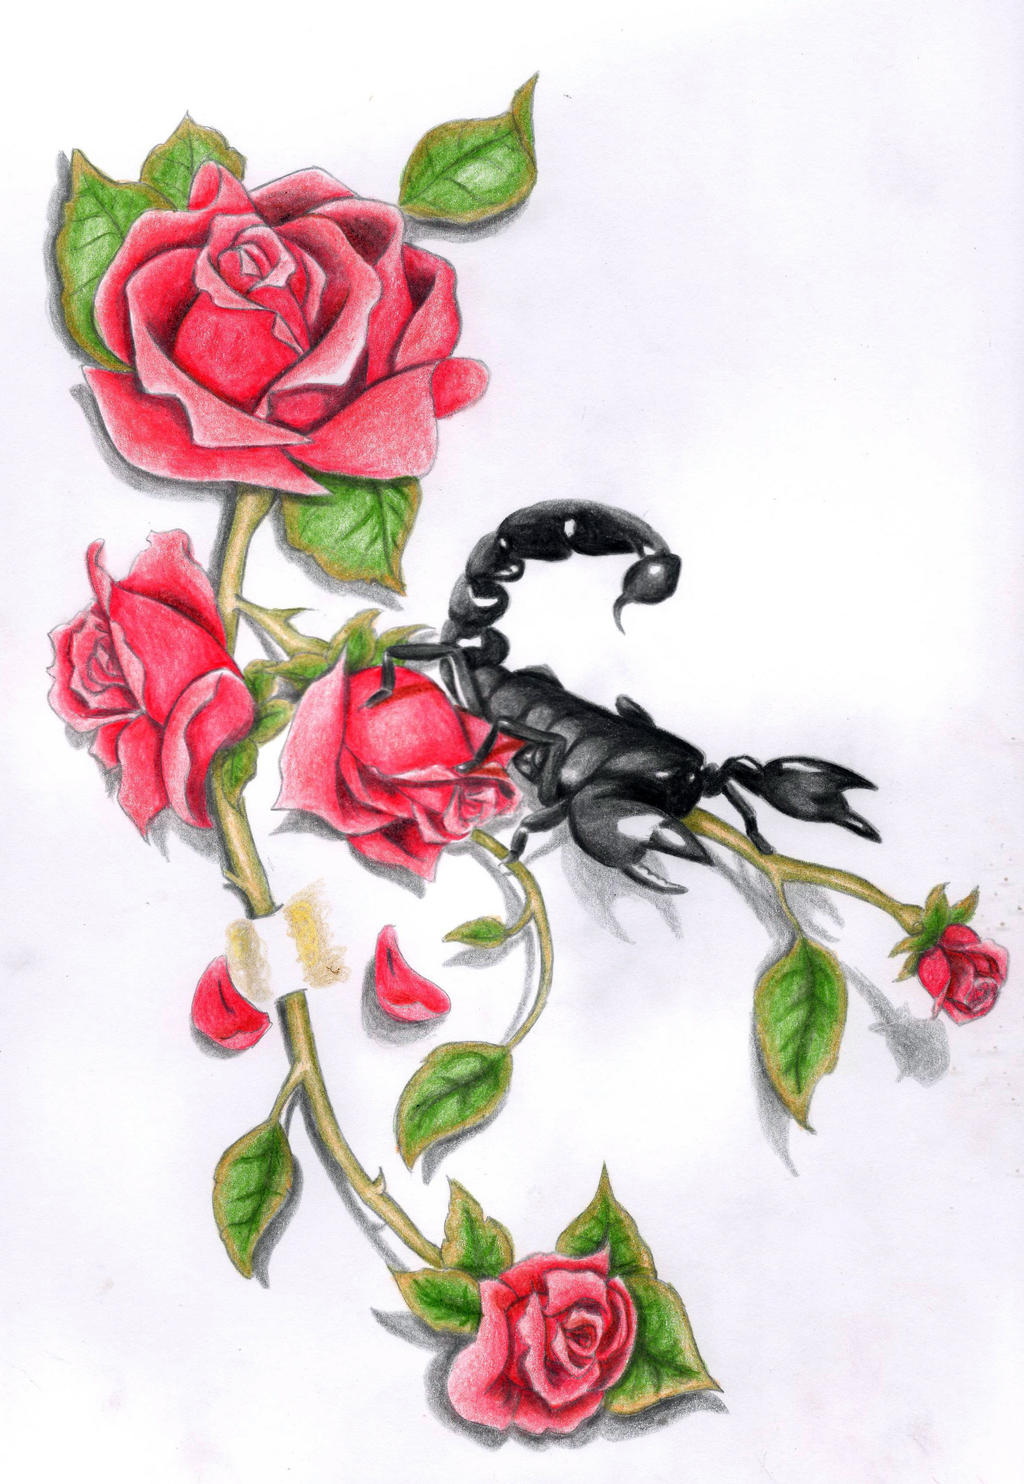 Roses And Scorpion By Sikinnisdreams On Deviantart